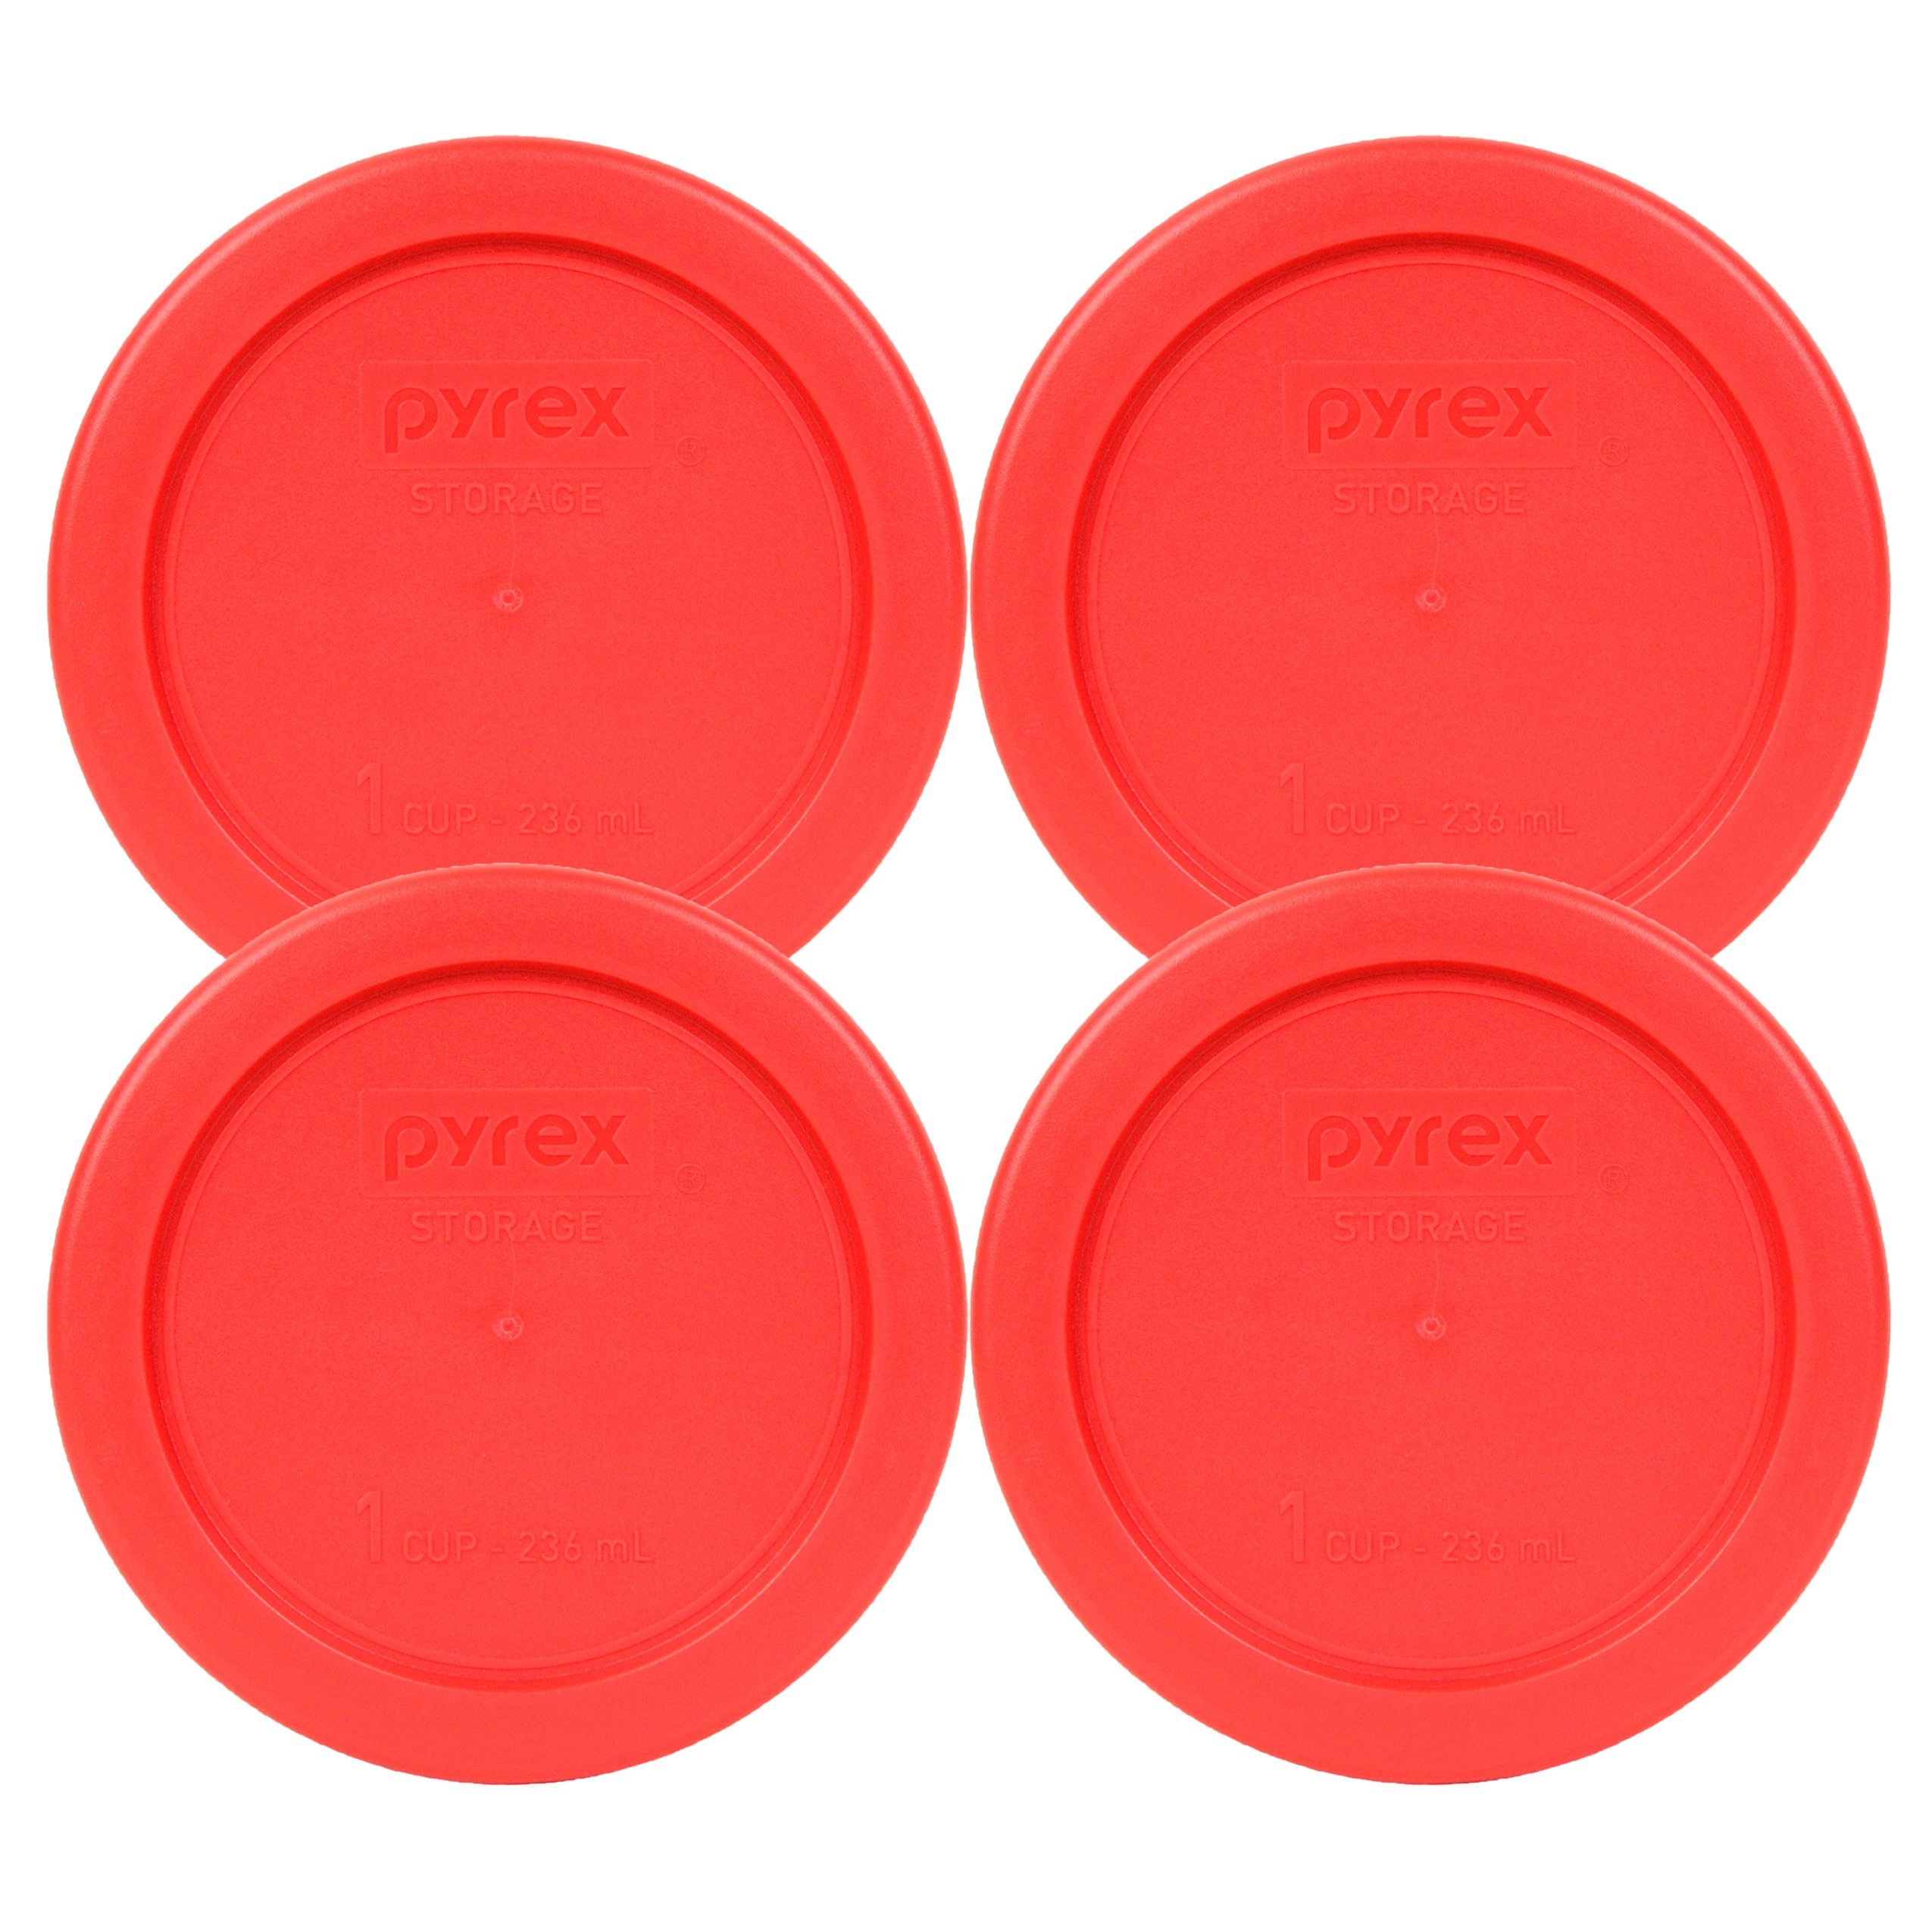 Pyrex 7202-Pc Red Round 1 cup Plastic Lid (4 Pack)